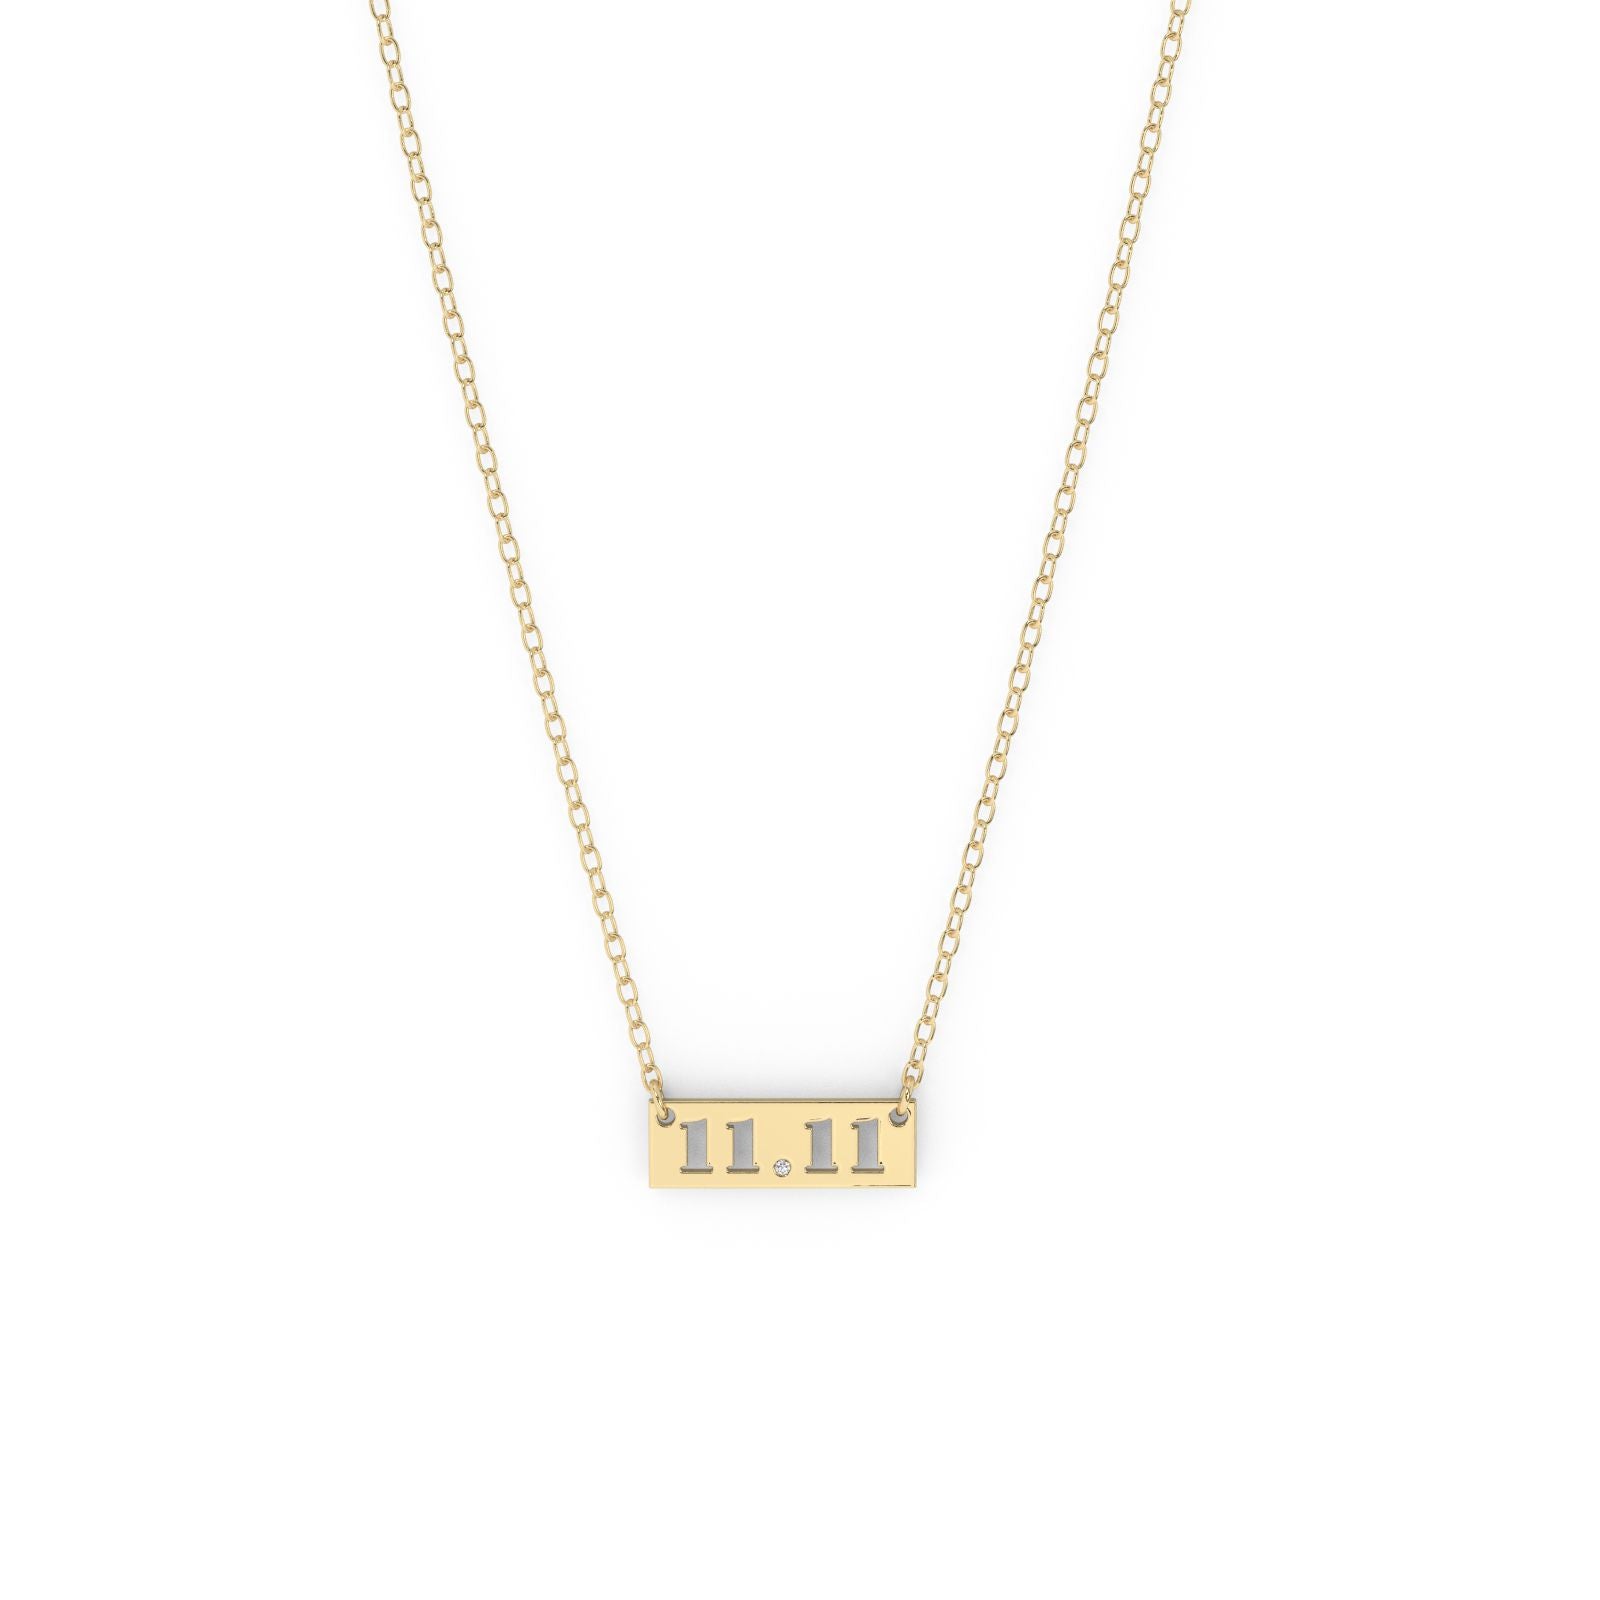 Synchronistic 1111 Necklace – Child of Wild